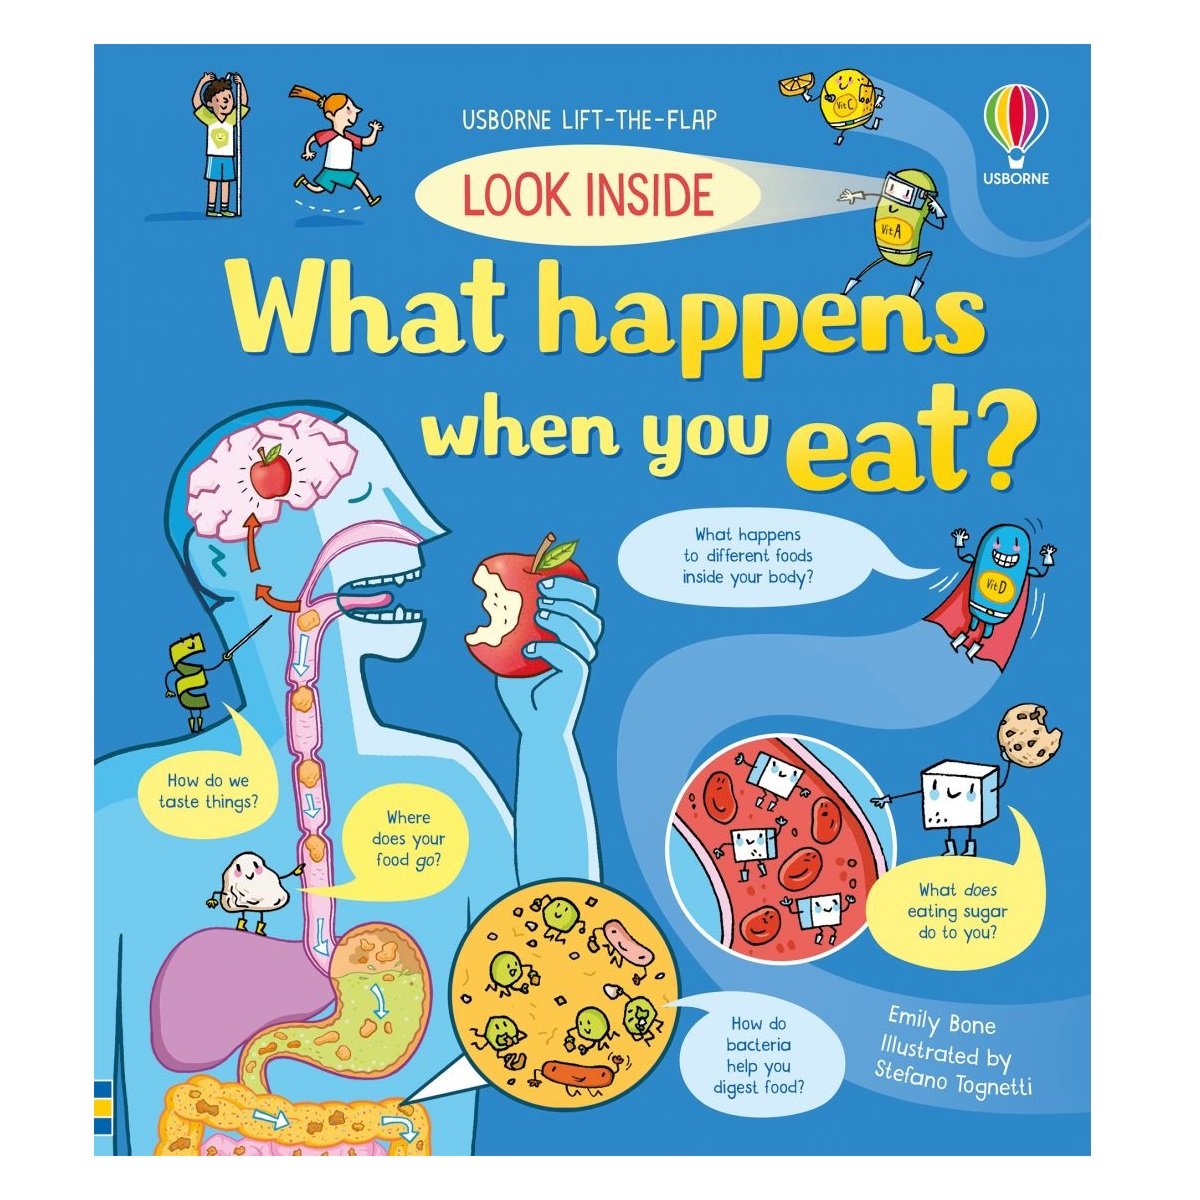 Look Inside What Happens When You Eat - Emily Bone, англ. язык (9781474952958) - фото 1